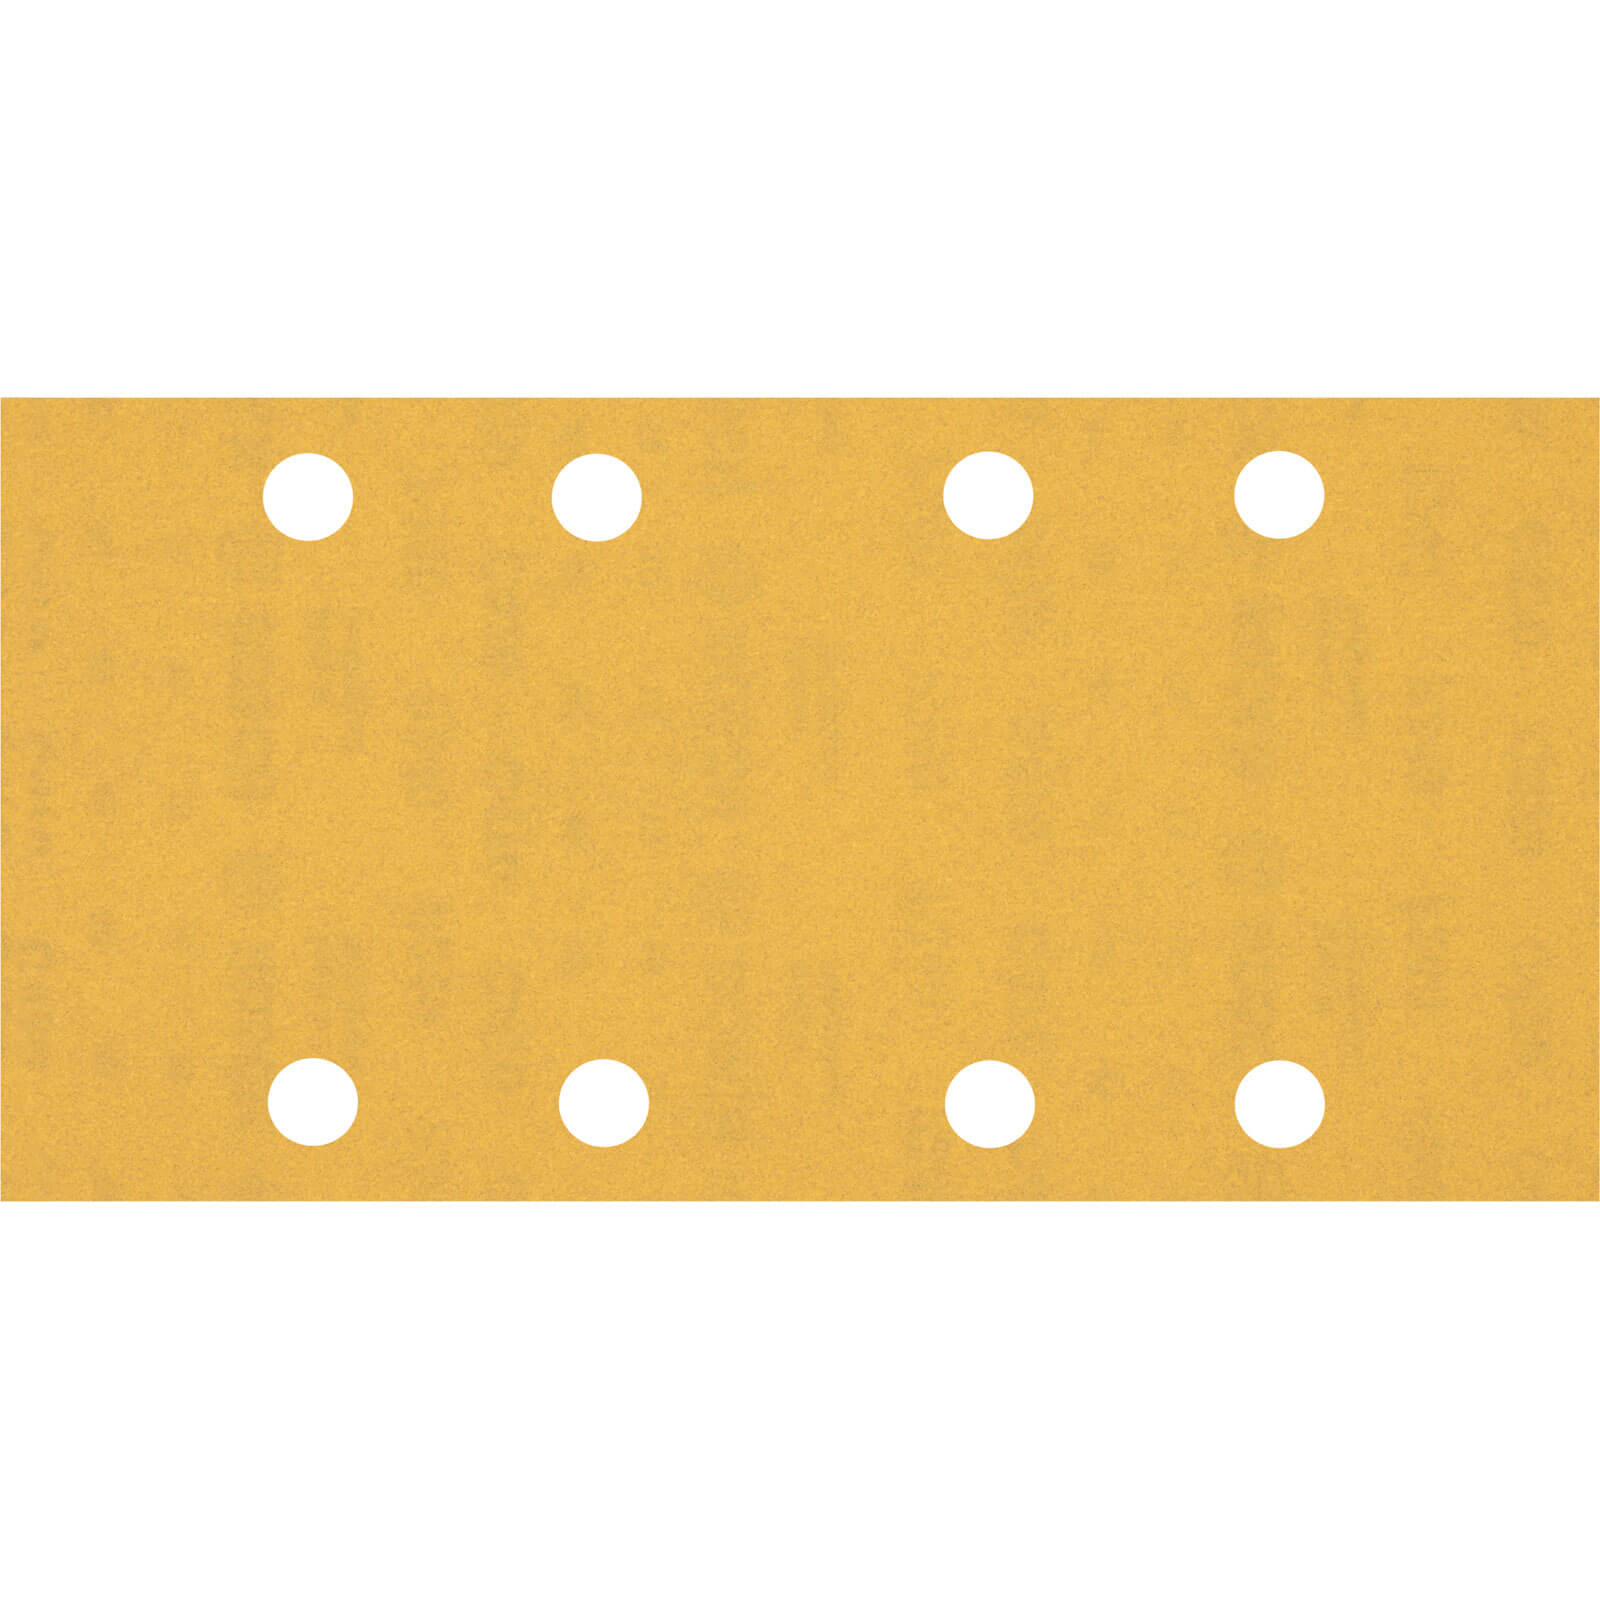 Image of Bosch Expert C470 Punched Hook and Loop Sanding Sheets 93mm x 186mm 240g Pack of 10